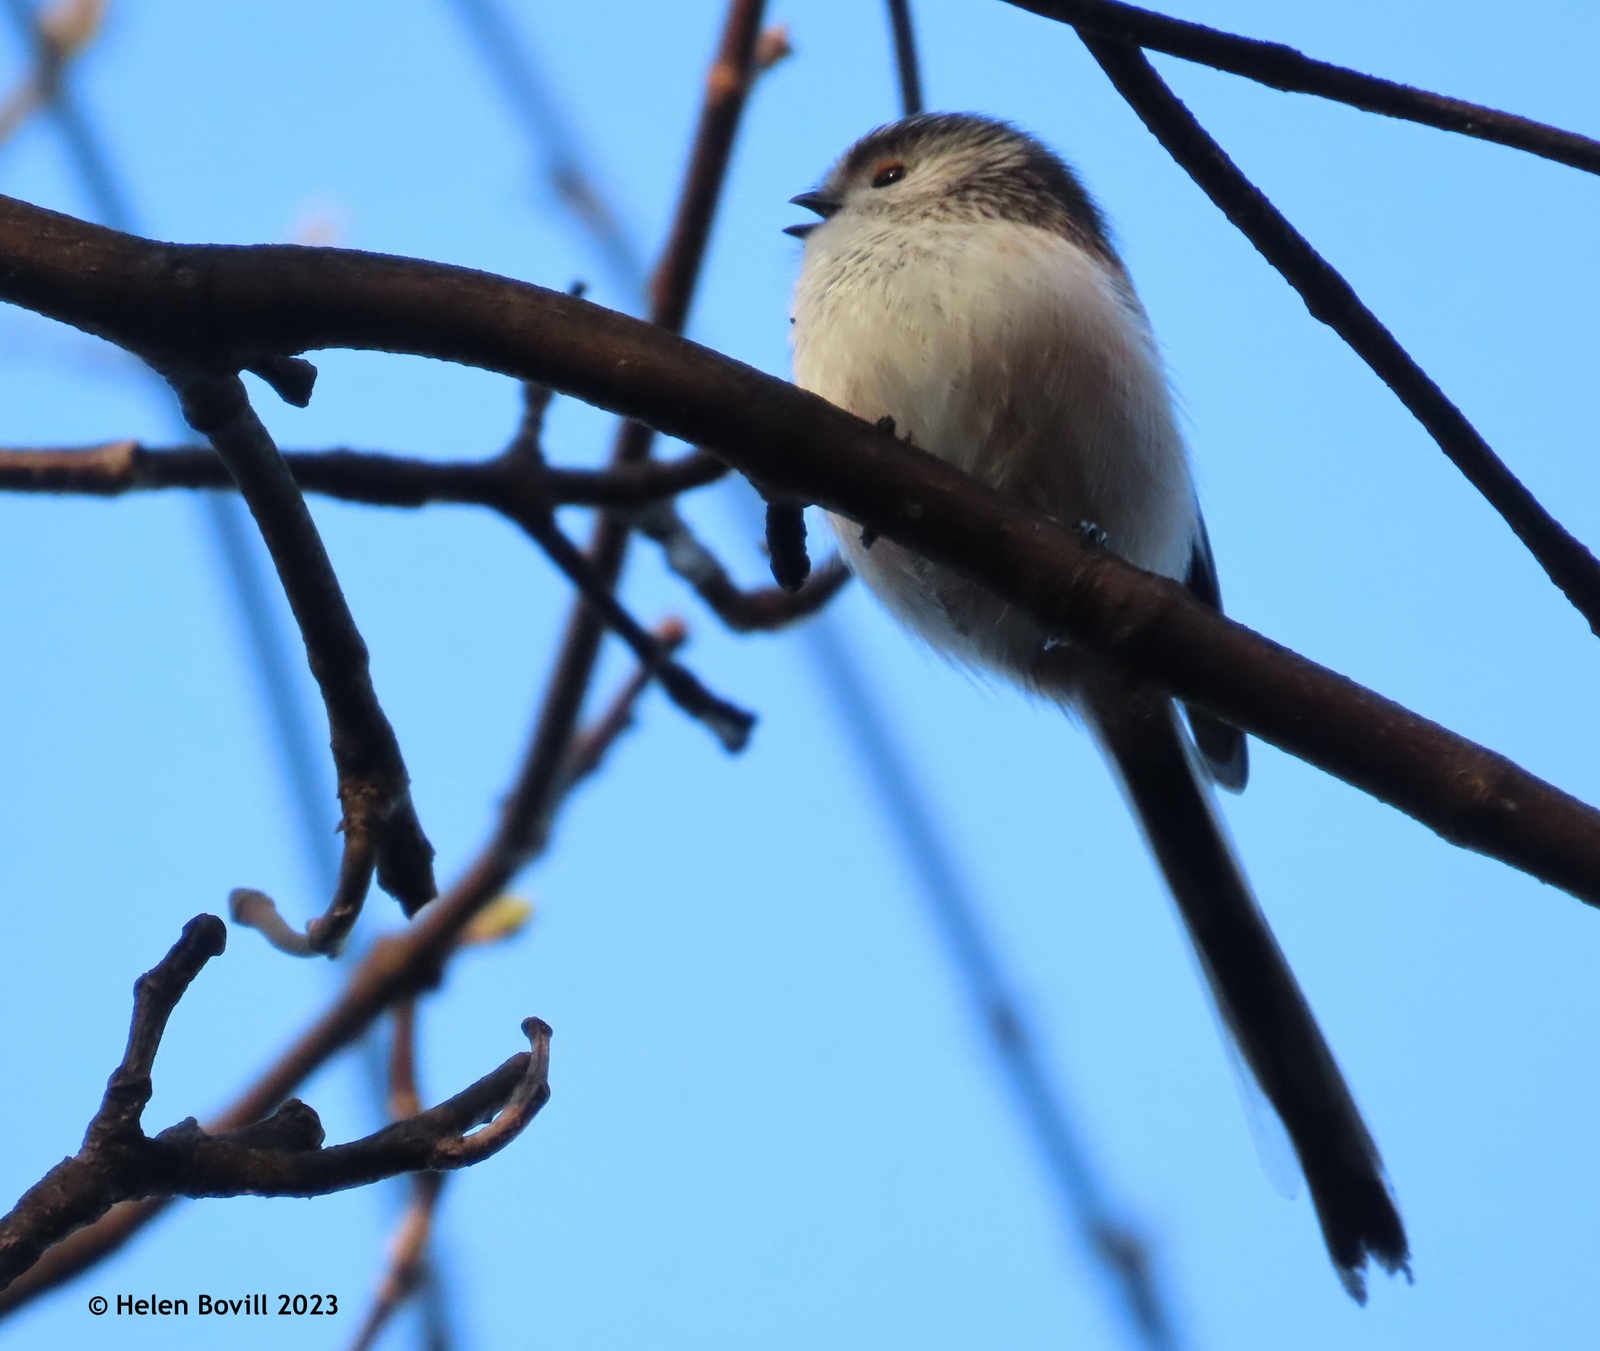 A long-tailed tit perched high up in a tree in the cemetery